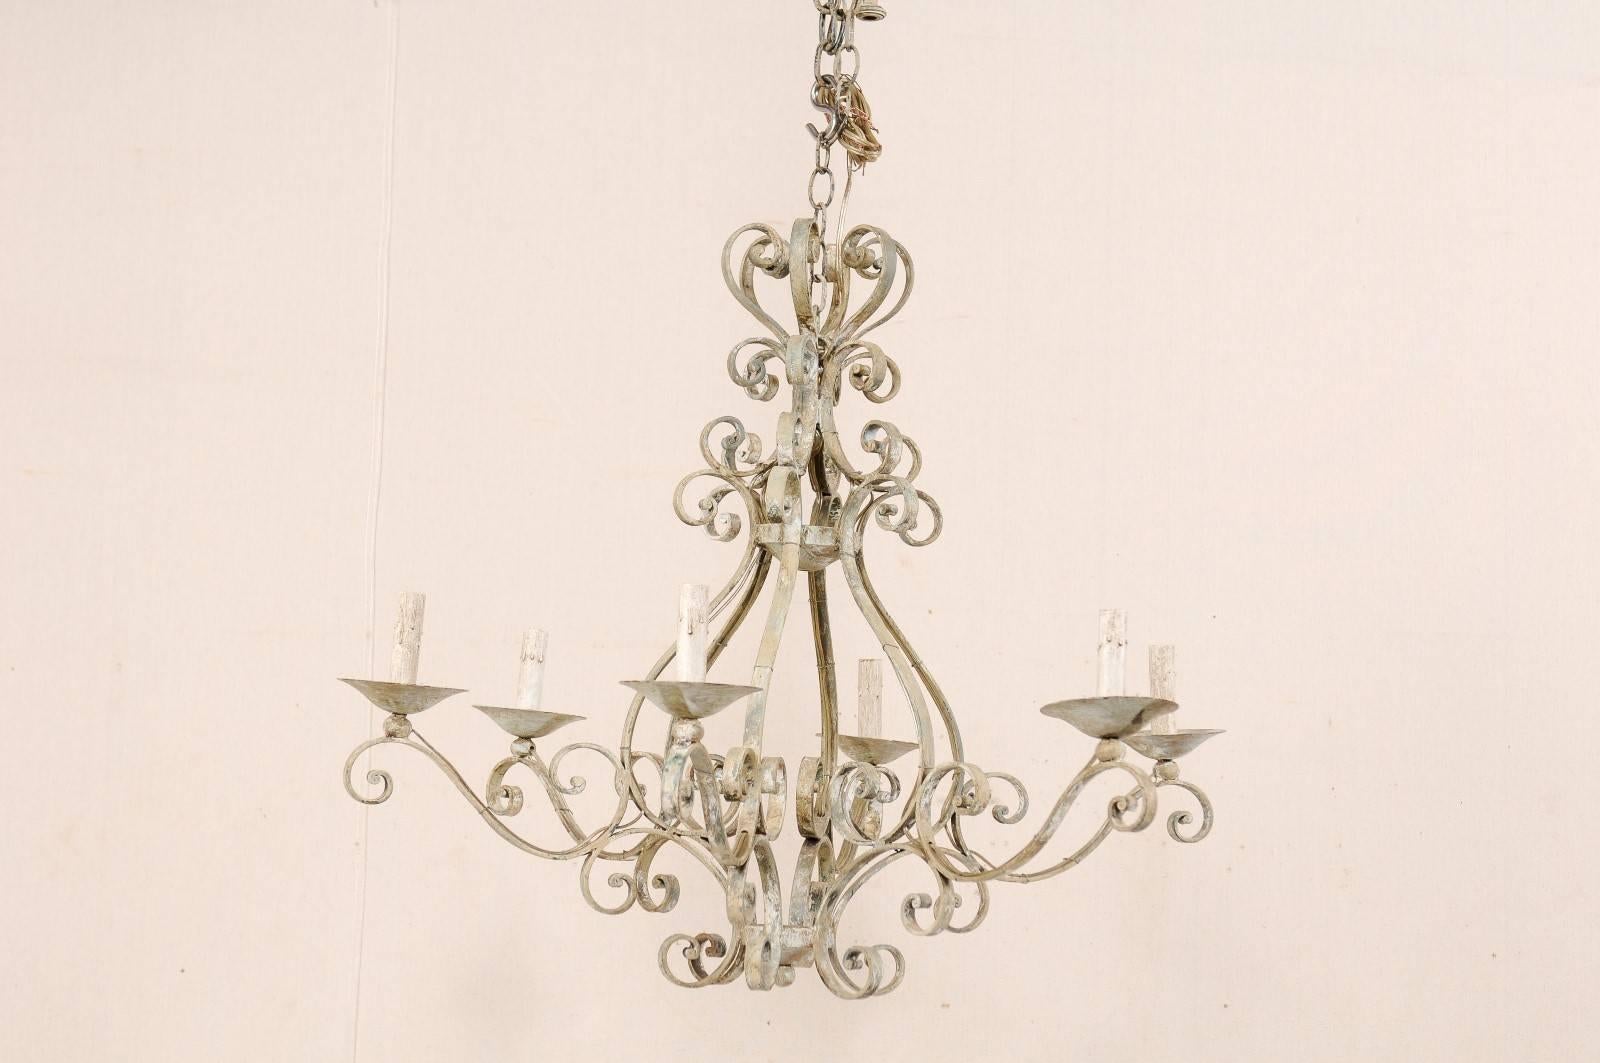 A vintage French heavily scrolled and painted six-light chandelier. This ornate French chandelier from the mid-20th century features a series of decorative S-scroll and C-scroll motifs throughout. Six scrolled arms lead out to their metal bobèches